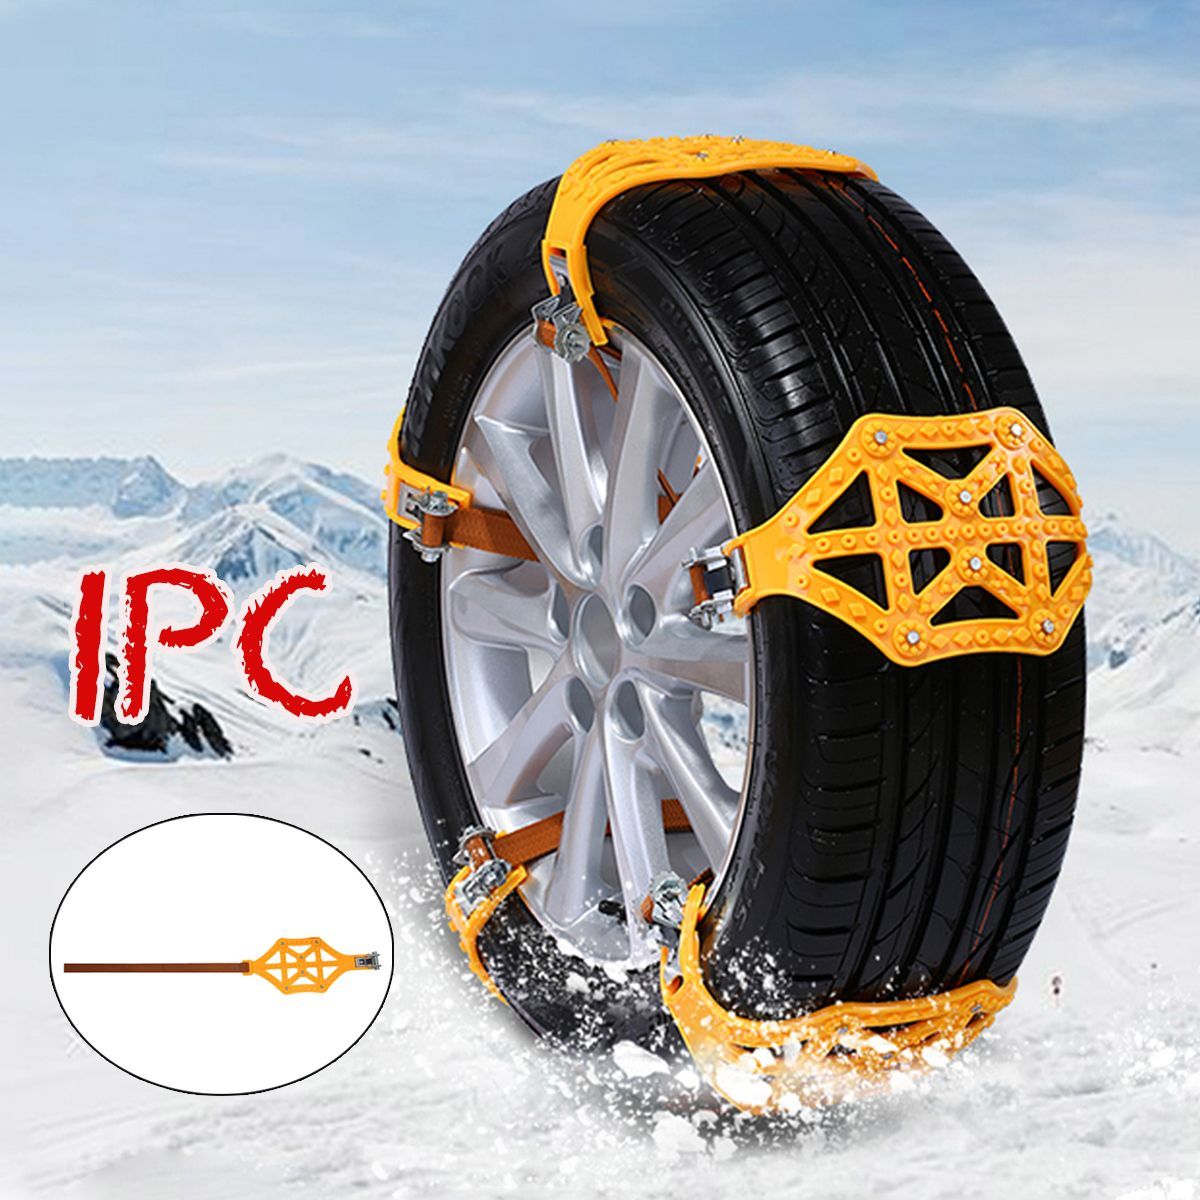 TPU-Snow-Chain-165-255mm-Truck-Car-Wheel-Tyre-Anti-skid-Safety-Driving-Belt-Yellow-for-Ice-Sand-Mudd-1602660